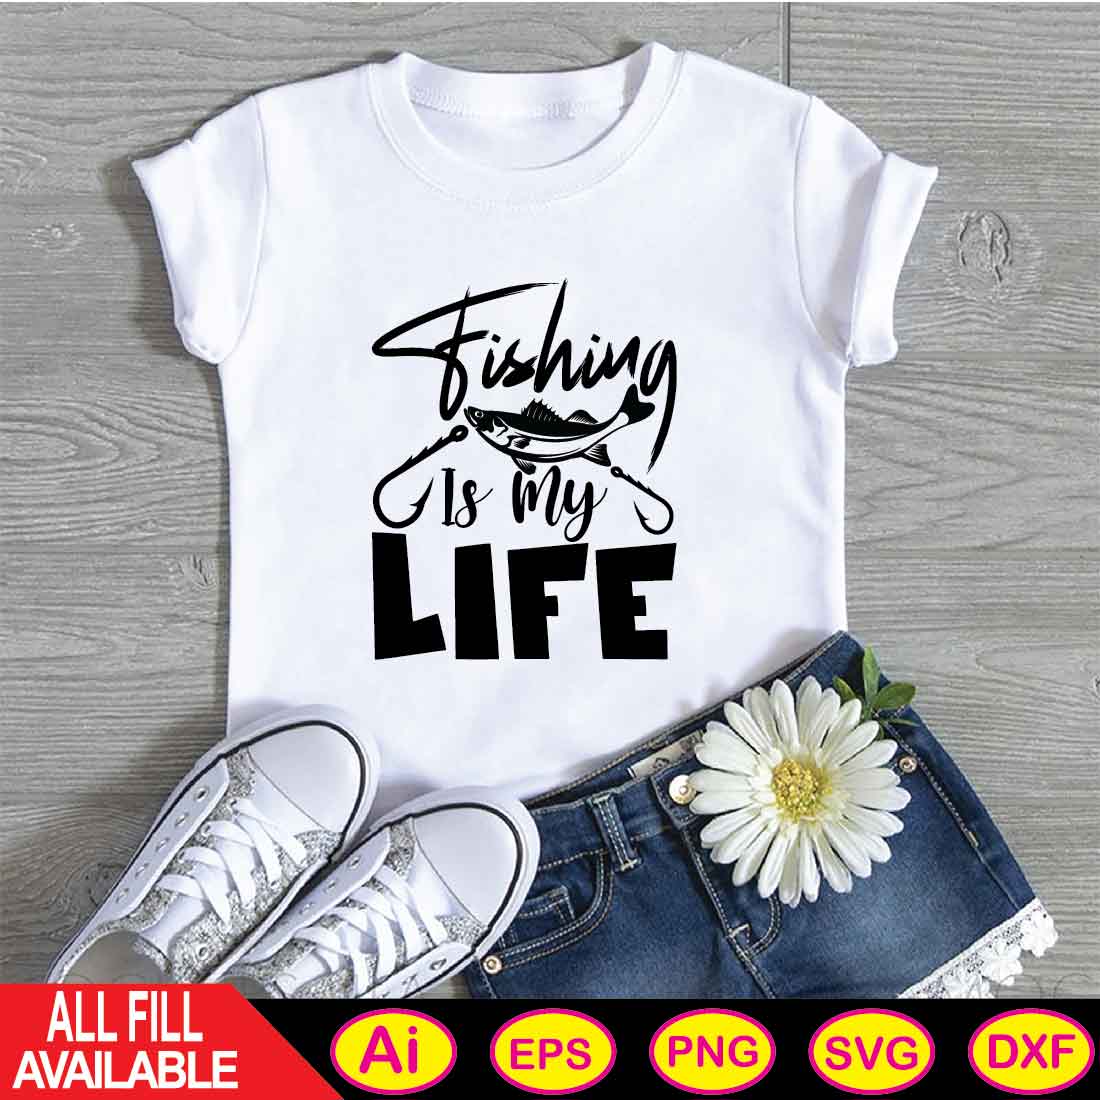 Fishing Is My Life t-shirt cover image.